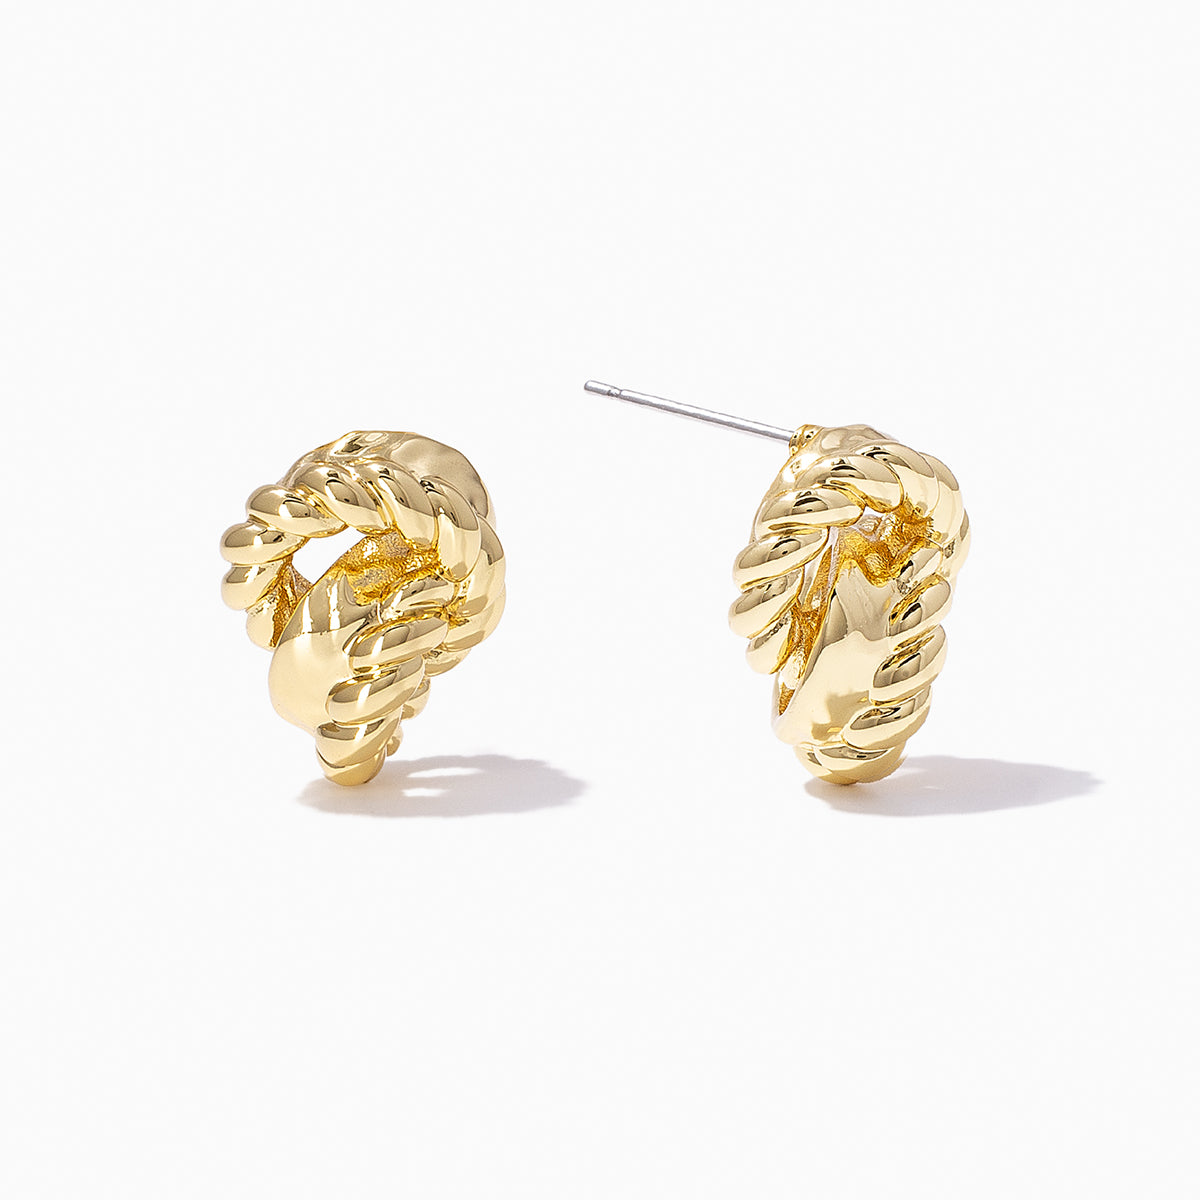 Eternity Stud Earrings | Gold | Product Detail Image | Uncommon James